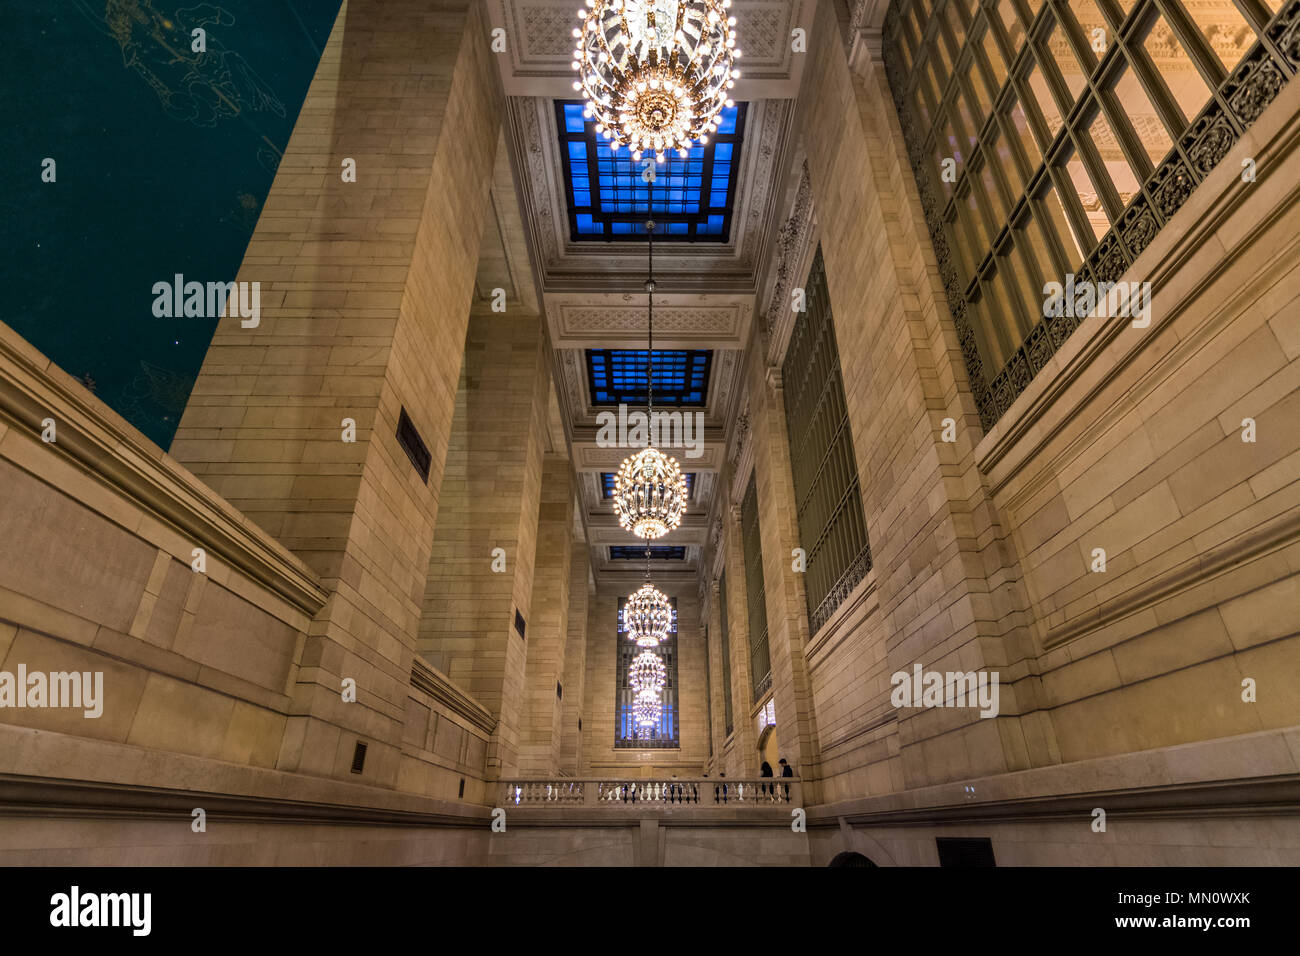 New York, US - March 28, 2018: Ceilings and chandaliers at the iconic Central Station in New York Stock Photo